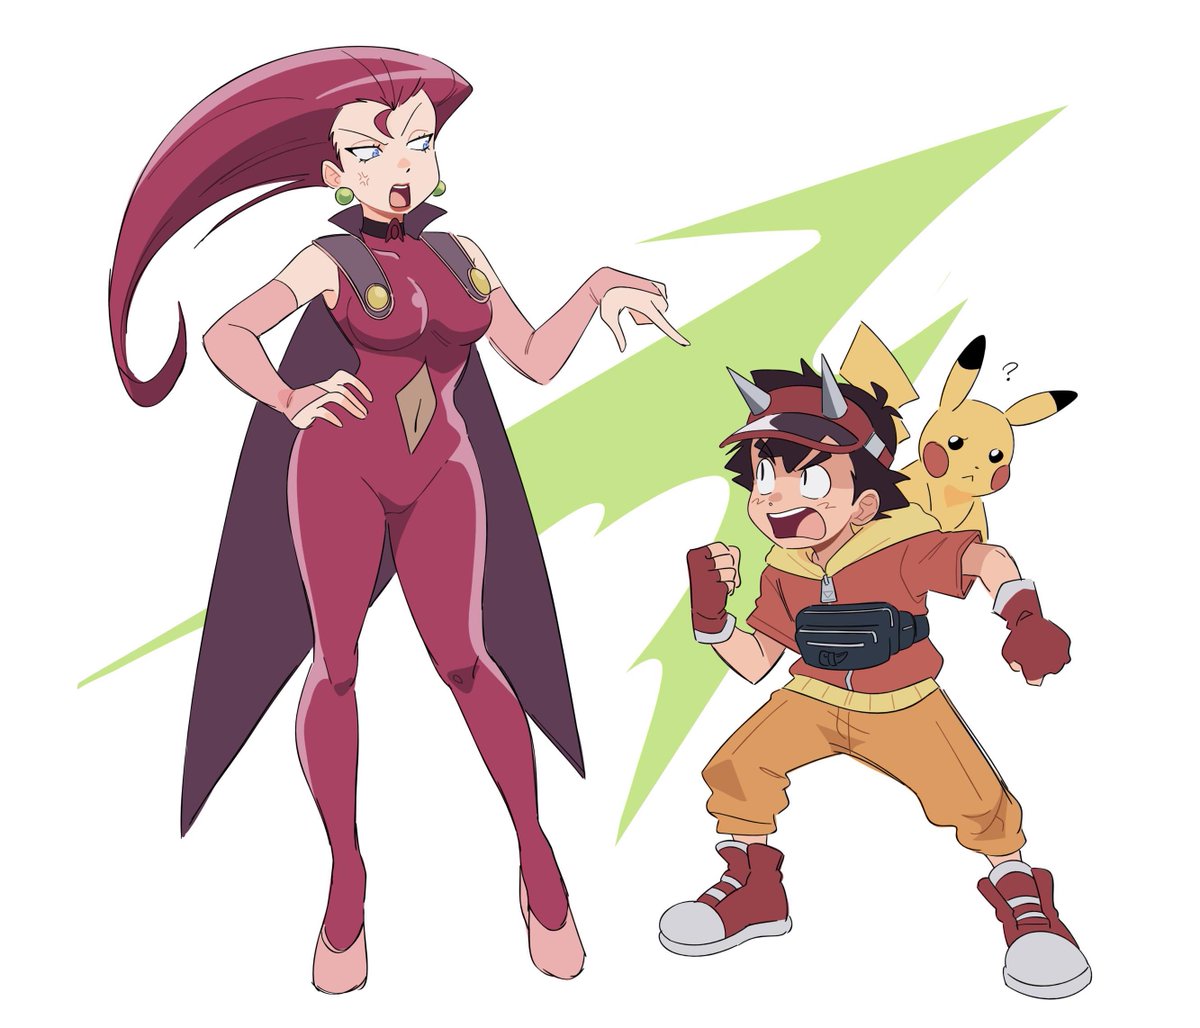 Femme fatale, girlfailure with a tragic past and spunky preteen boy with electric pet (who both happen to be voiced by @TheVeronicaT and @RachaelLillis) is a winning formula idk idk